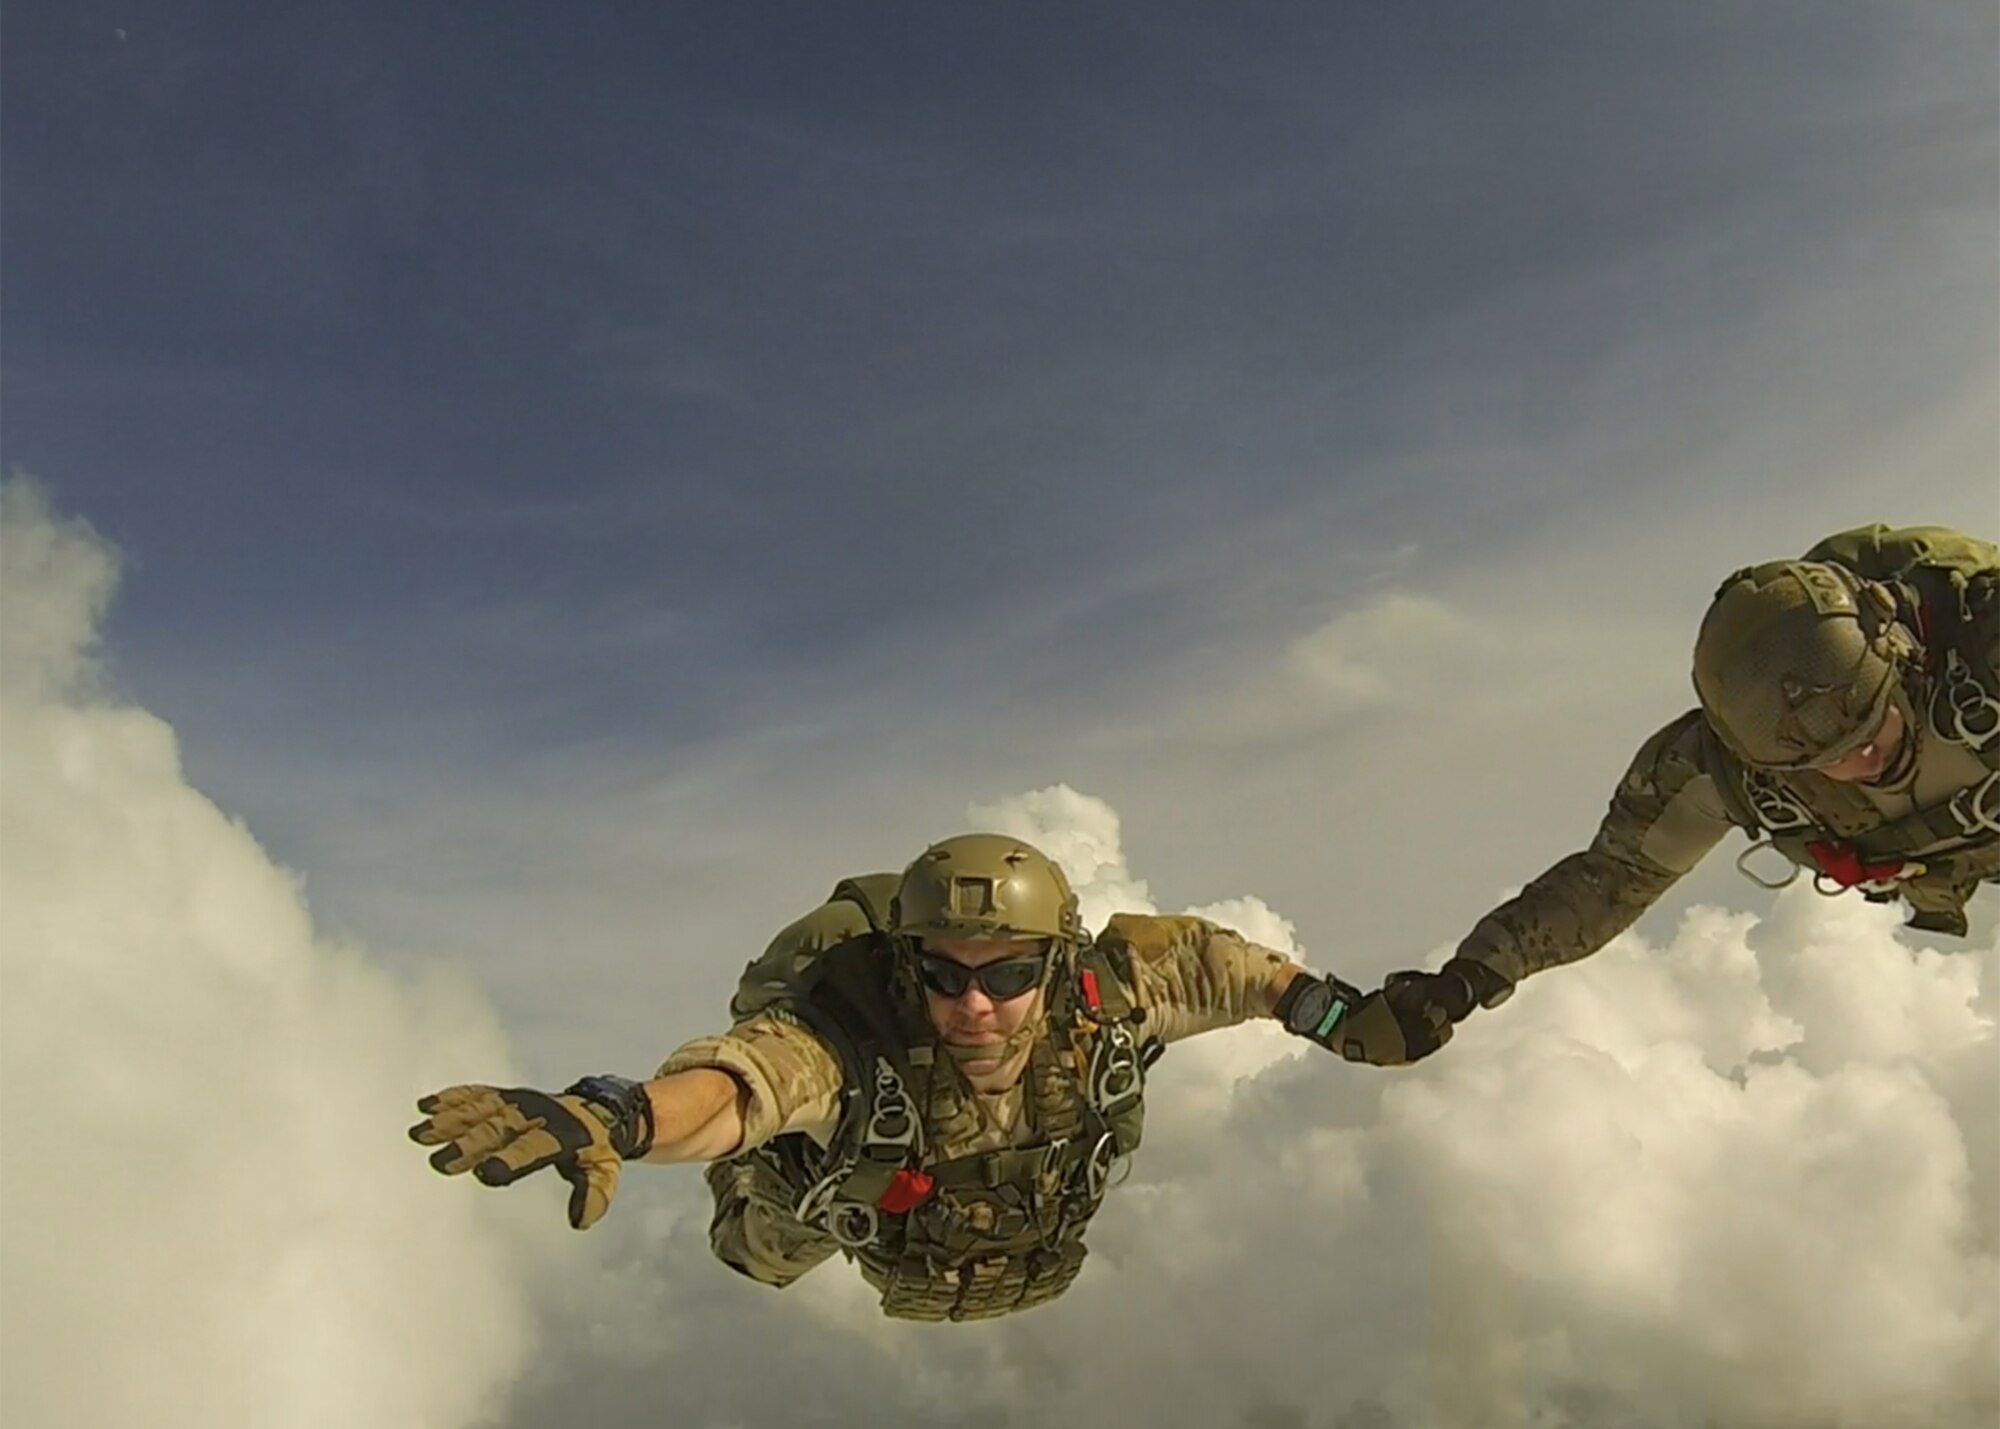 Staff Sgt. Travis Jordan, 320th Special Tactics Squadron combat controller, performs a High Altitude Low Opening
jump recently in Texas. He is on the 12 Outstanding Airmen of the Year for 2015. (Courtesy photo)